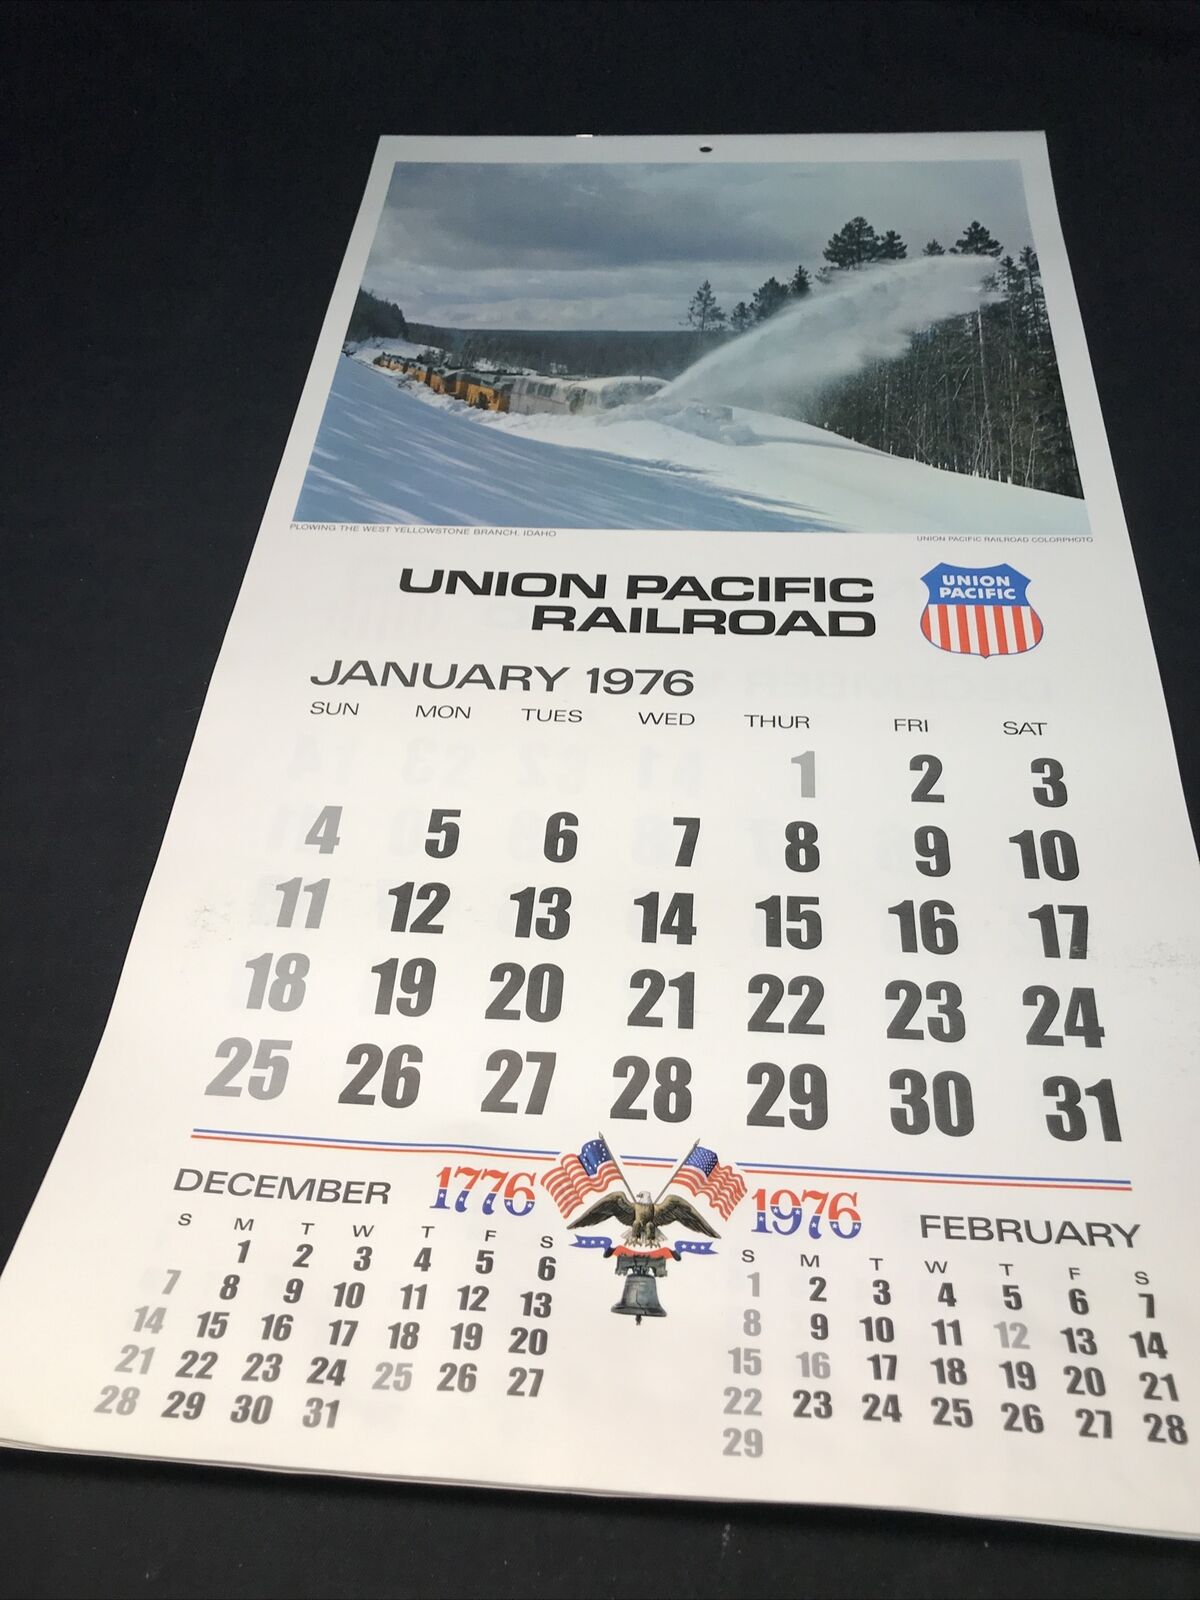 1976 UNION PACIFIC RAILROAD CALENDAR PHOTOS OF WESTERN UNITED STATES 23 x 12 1/2